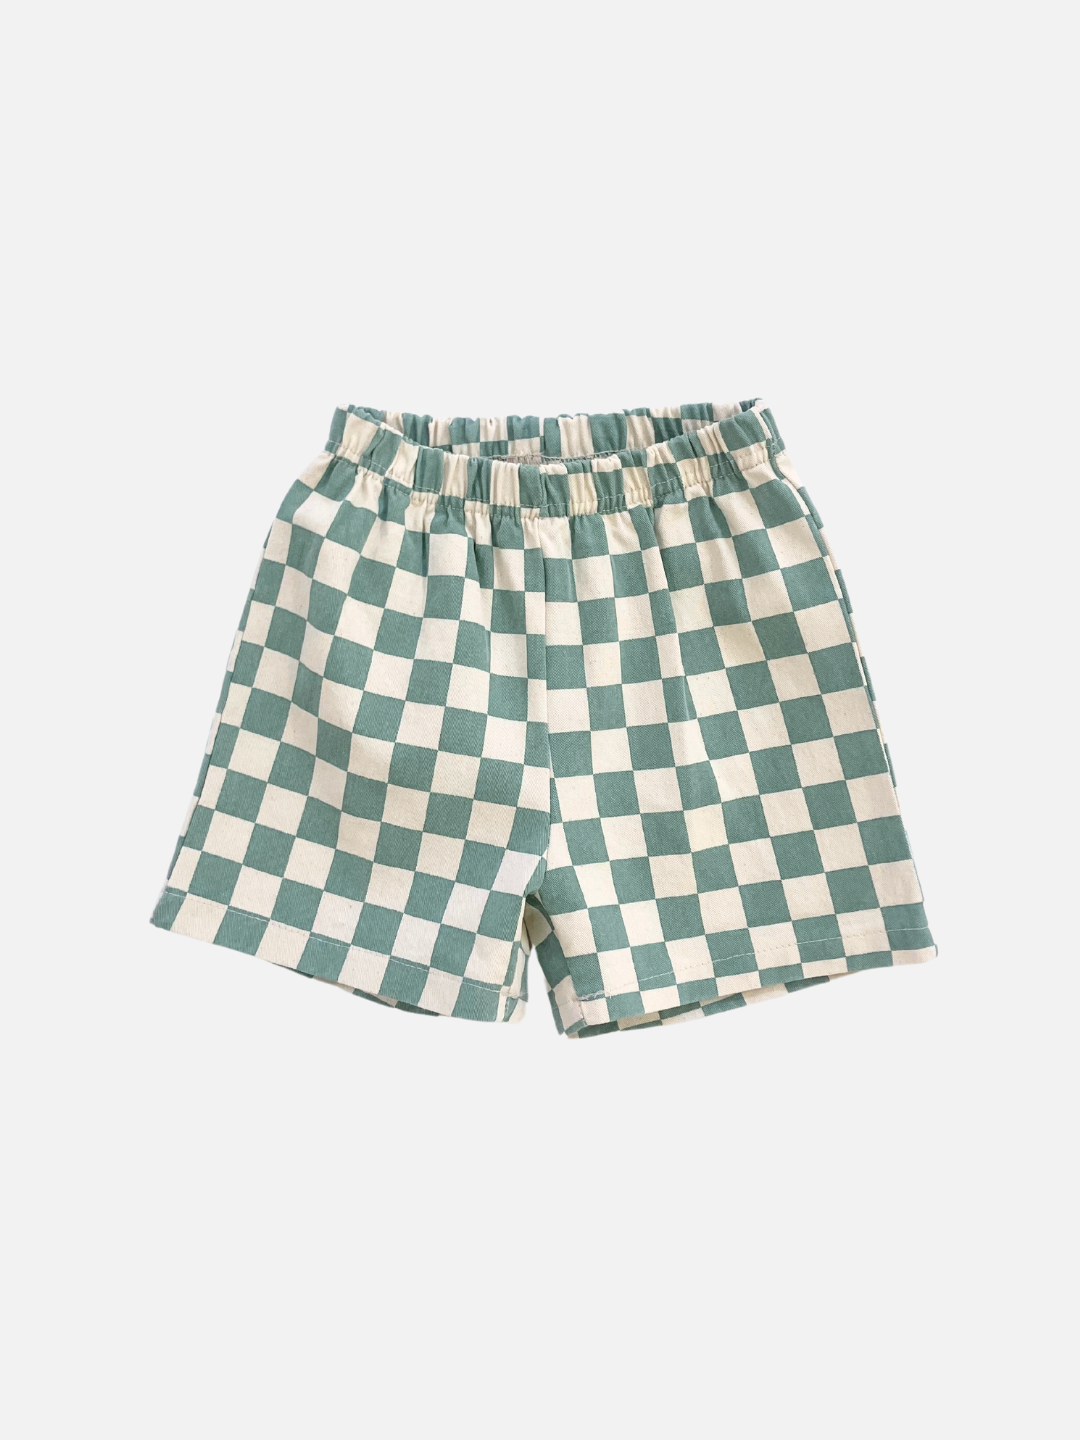 A front view of the kid's Frankie Short in Teal & Ivory check